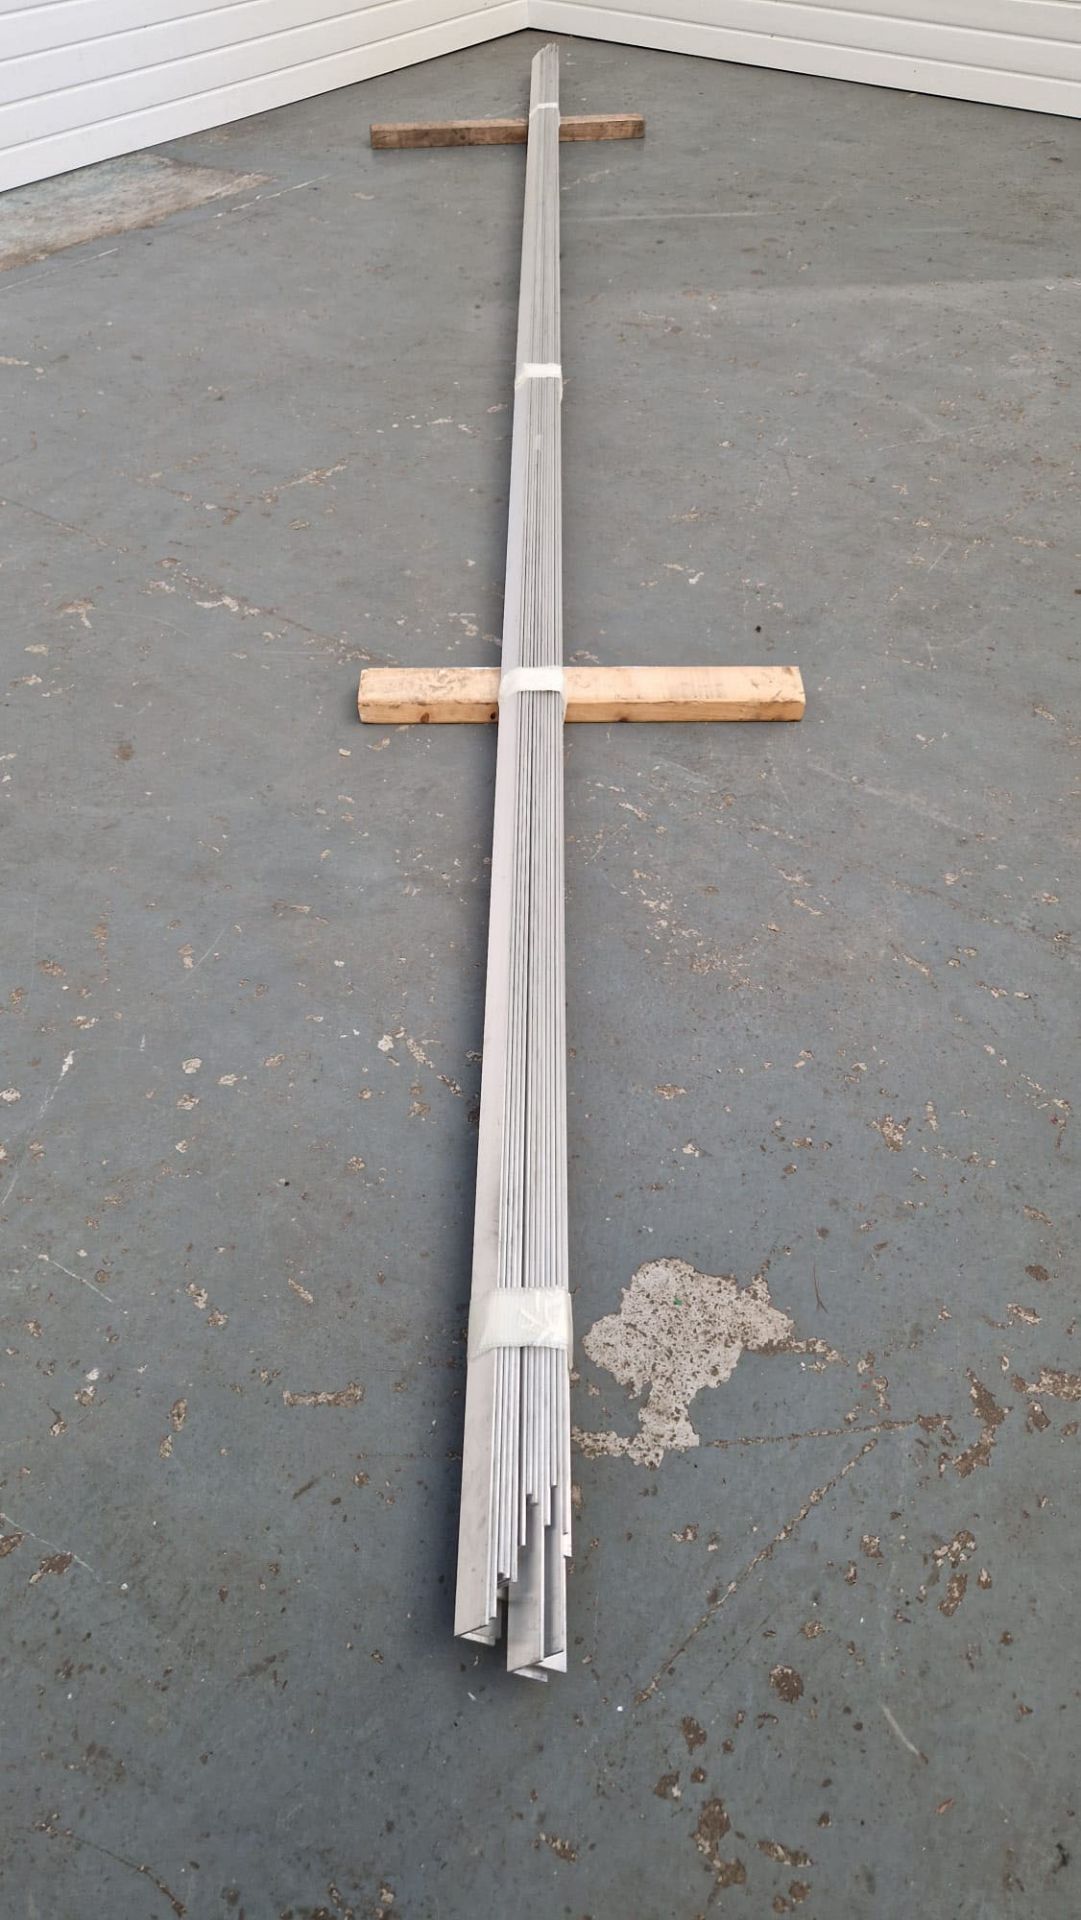 13 x Lengths of Aluminium 'L' Shape Angle Plate. Dimensions 1 1/2" x 1 1/2" x 1/8". Length 5000mm. - Image 2 of 3